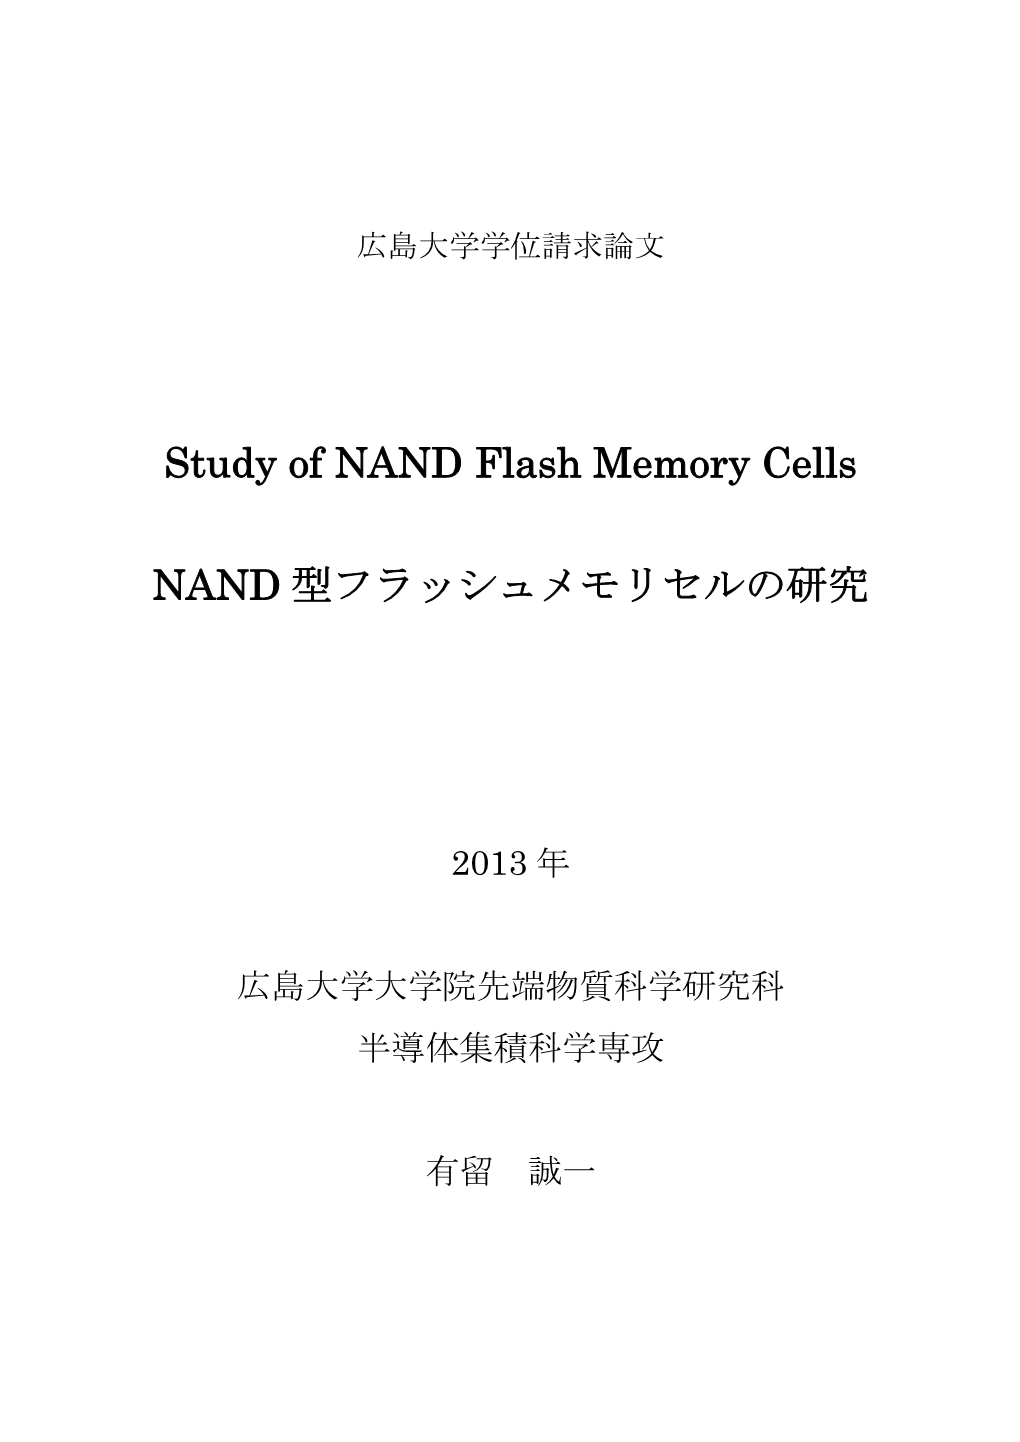 Study of NAND Flash Memory Cells NAND 型フラッシュメモリセルの研究